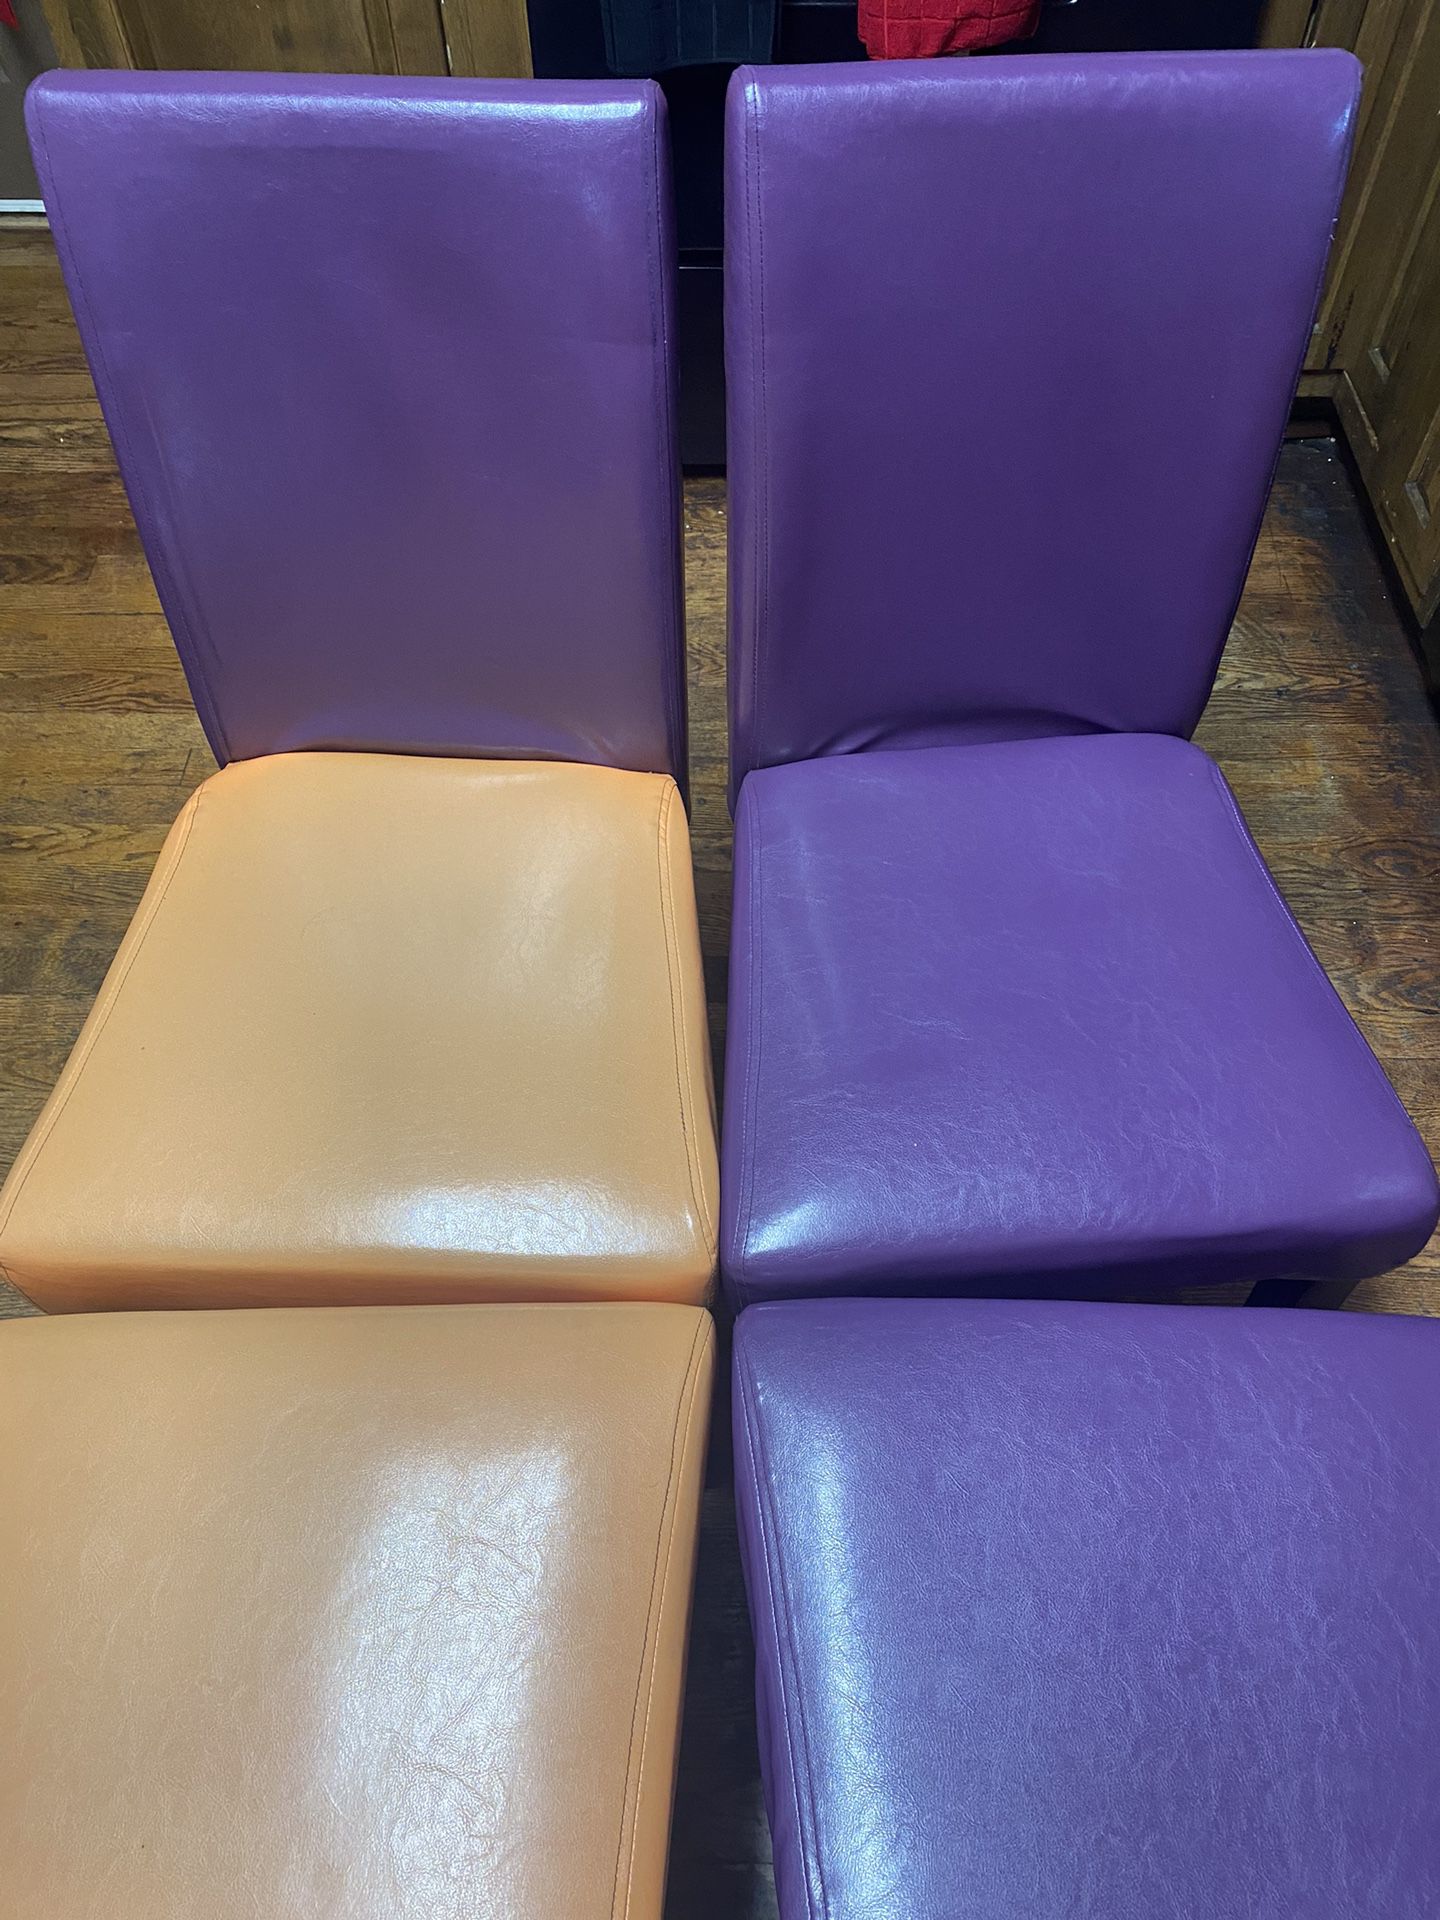 Dining Chairs for Sale